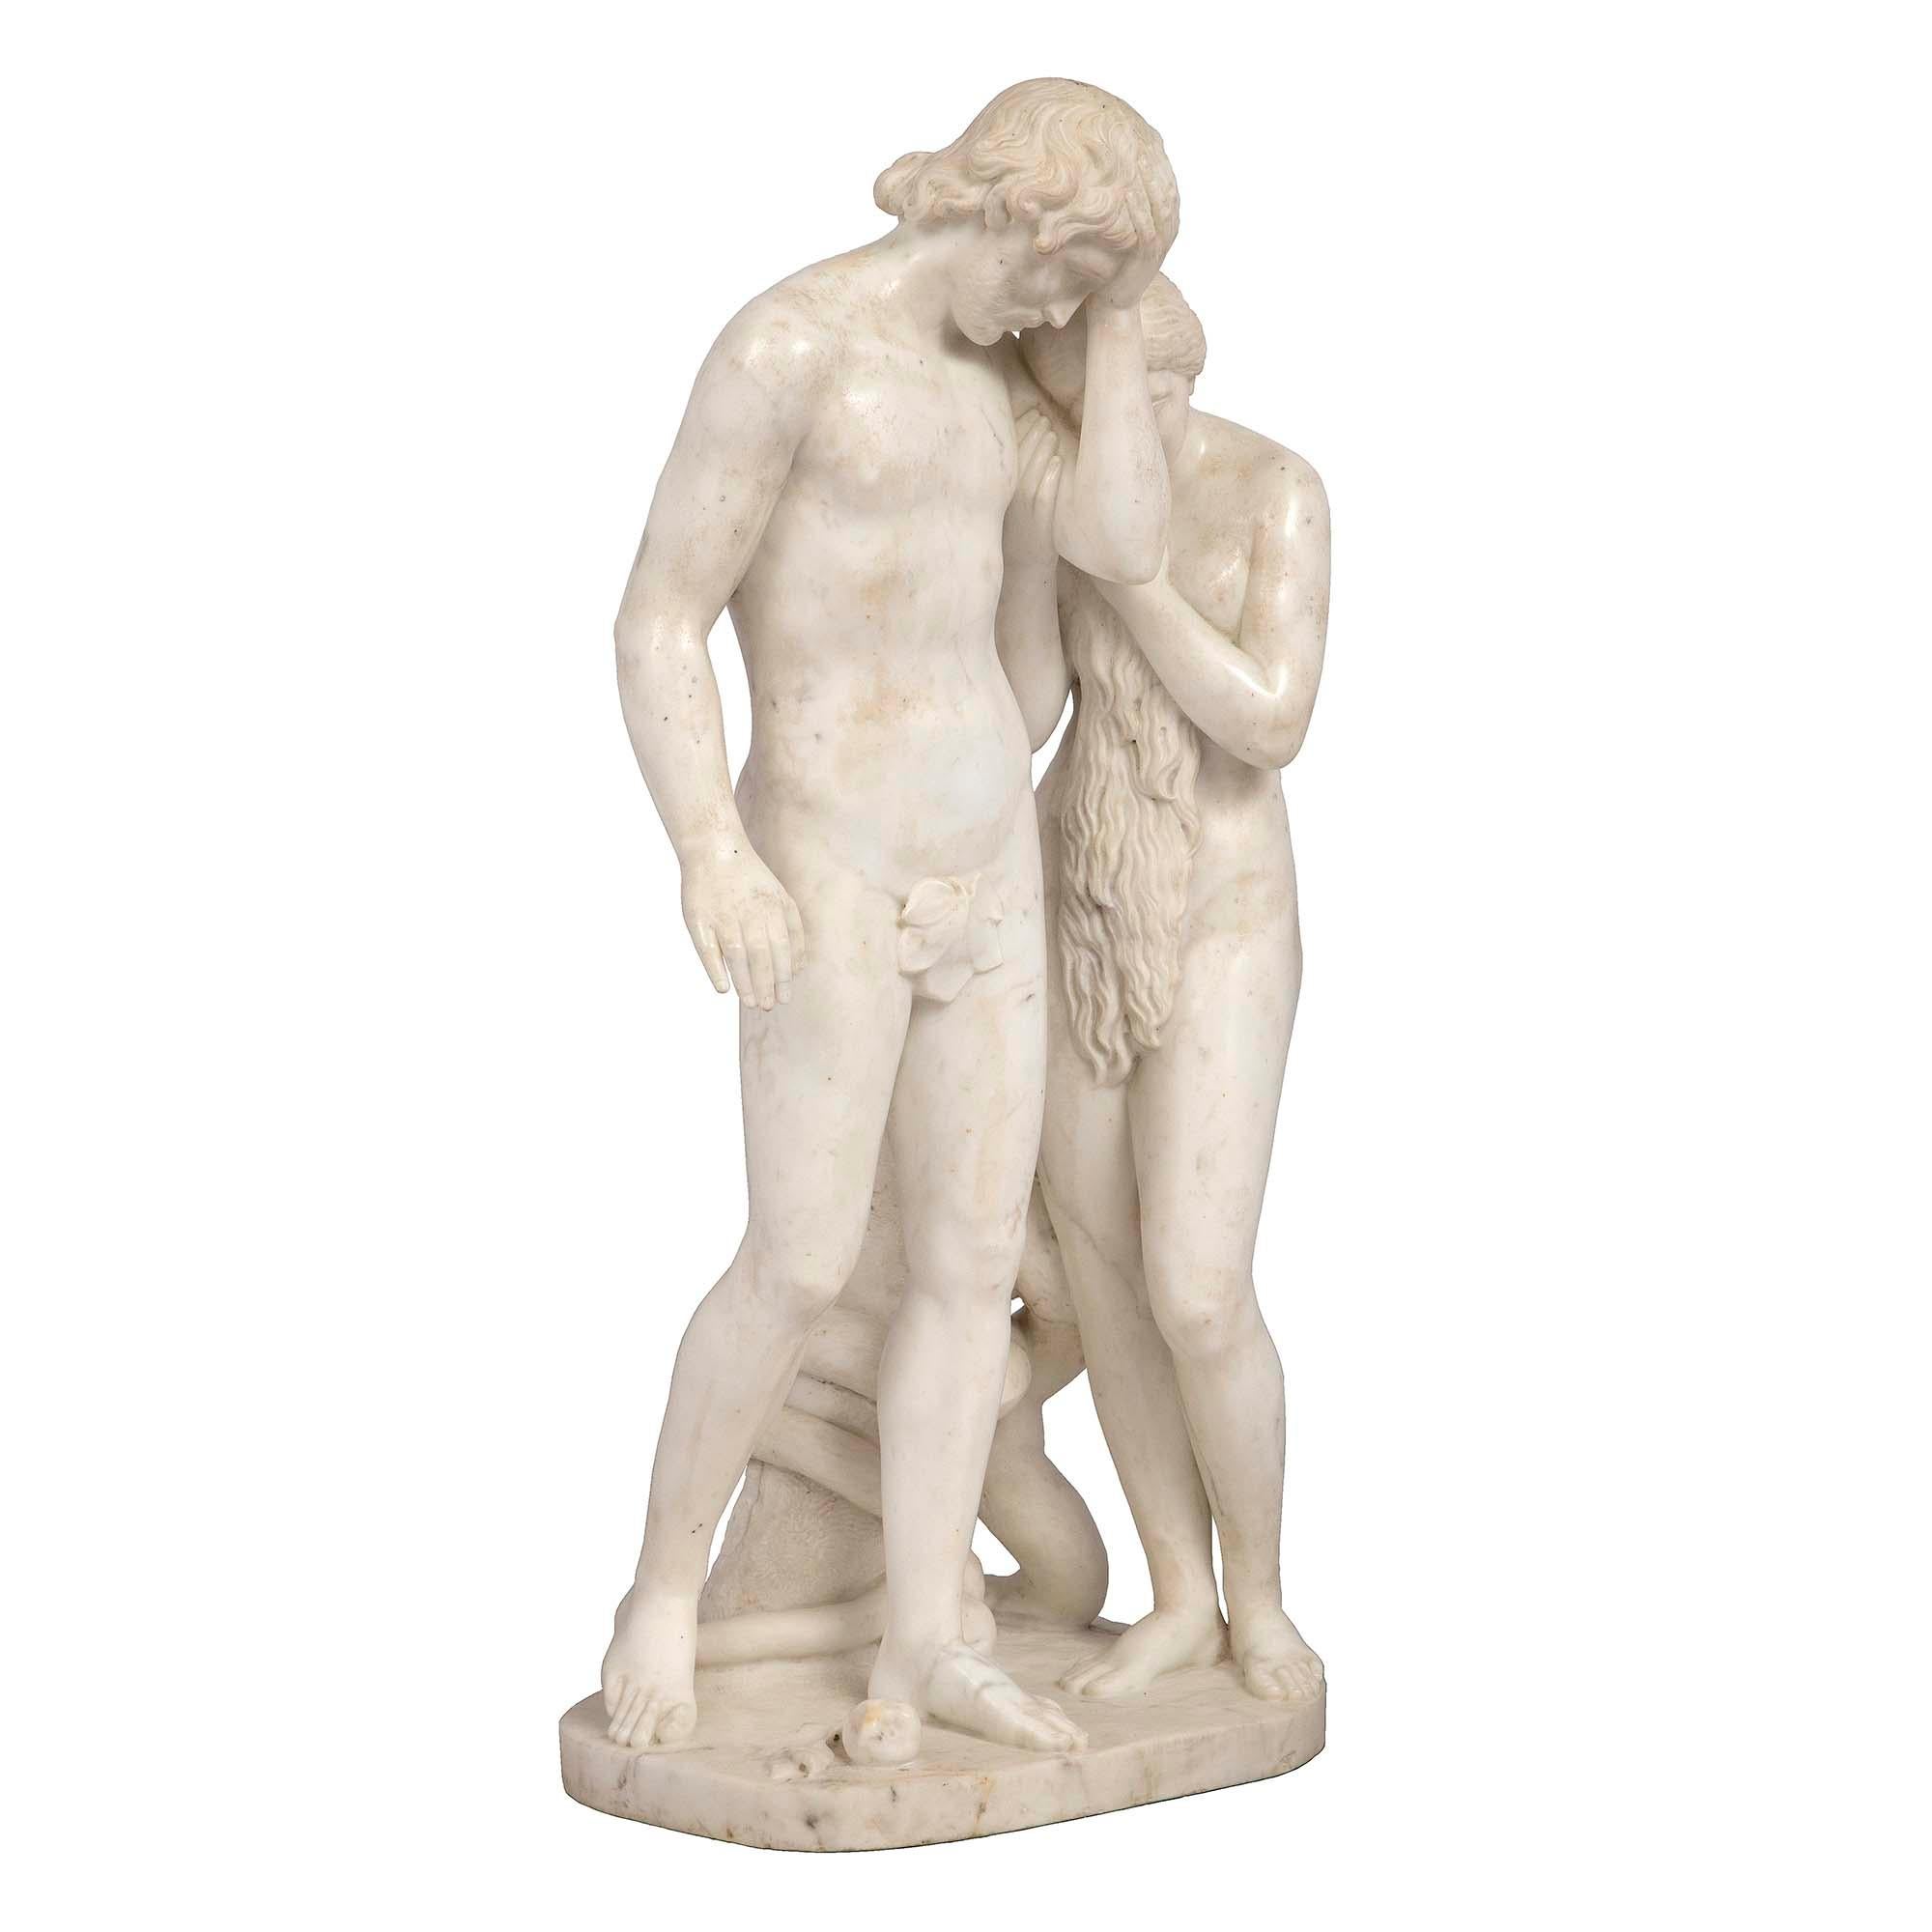 A beautiful Italian 19th century white Carrara marble sculpture of Adam and Eve. The sculpture is raised by a rock shaped base with a serpent wrapped around a tree trunk. Adam is depicted with an assuaged expression with an apple at his feet. Eve